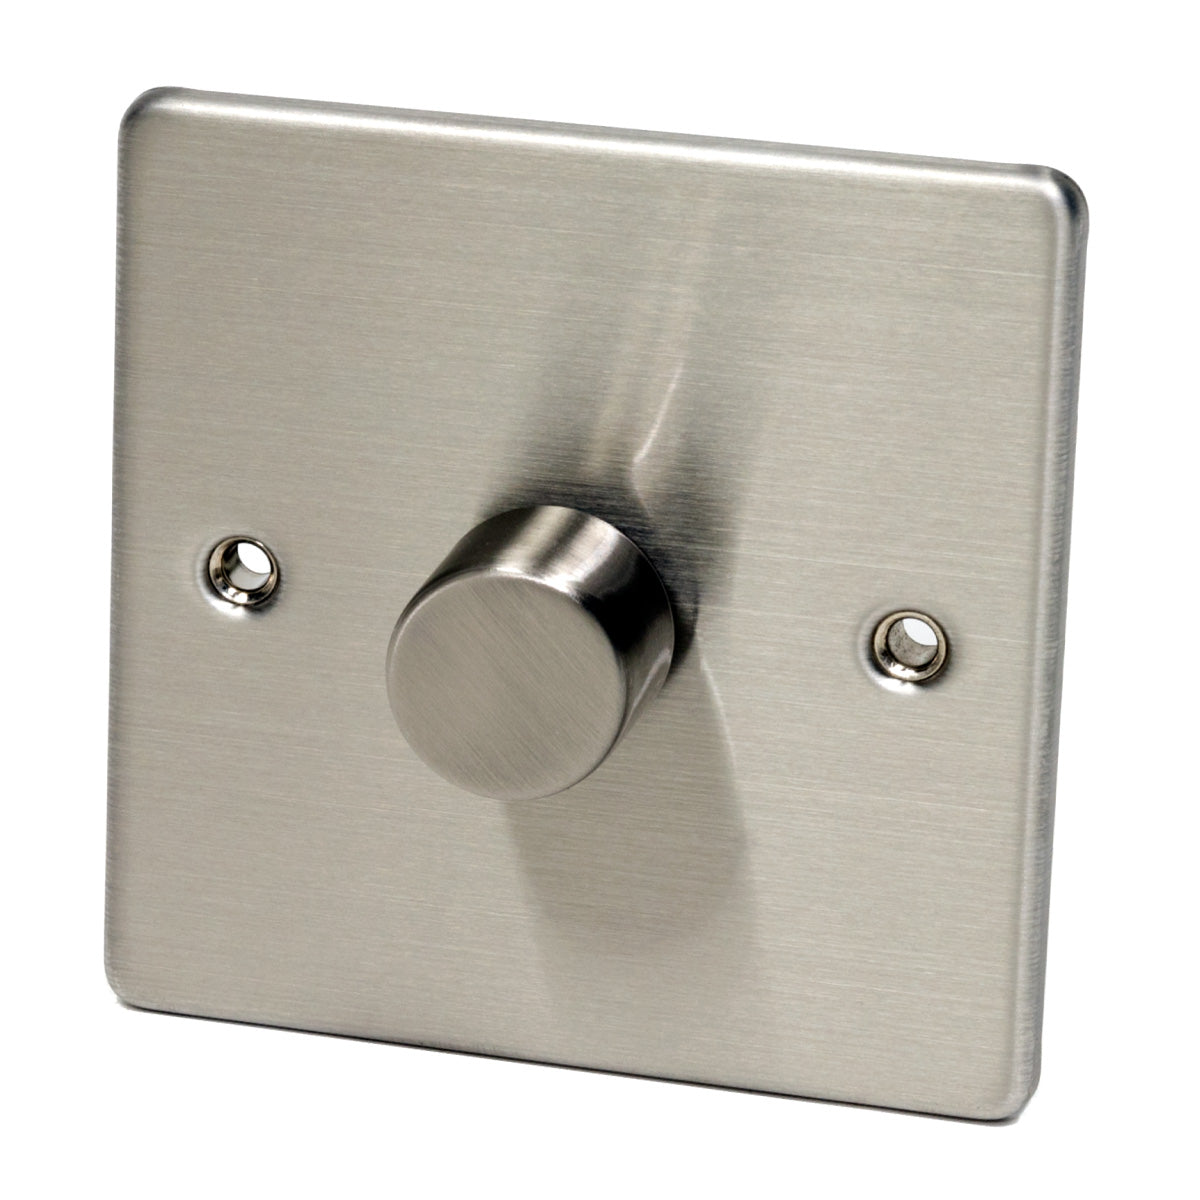 Stainless Steel 1 Gang 1 Way Dimmer Switch